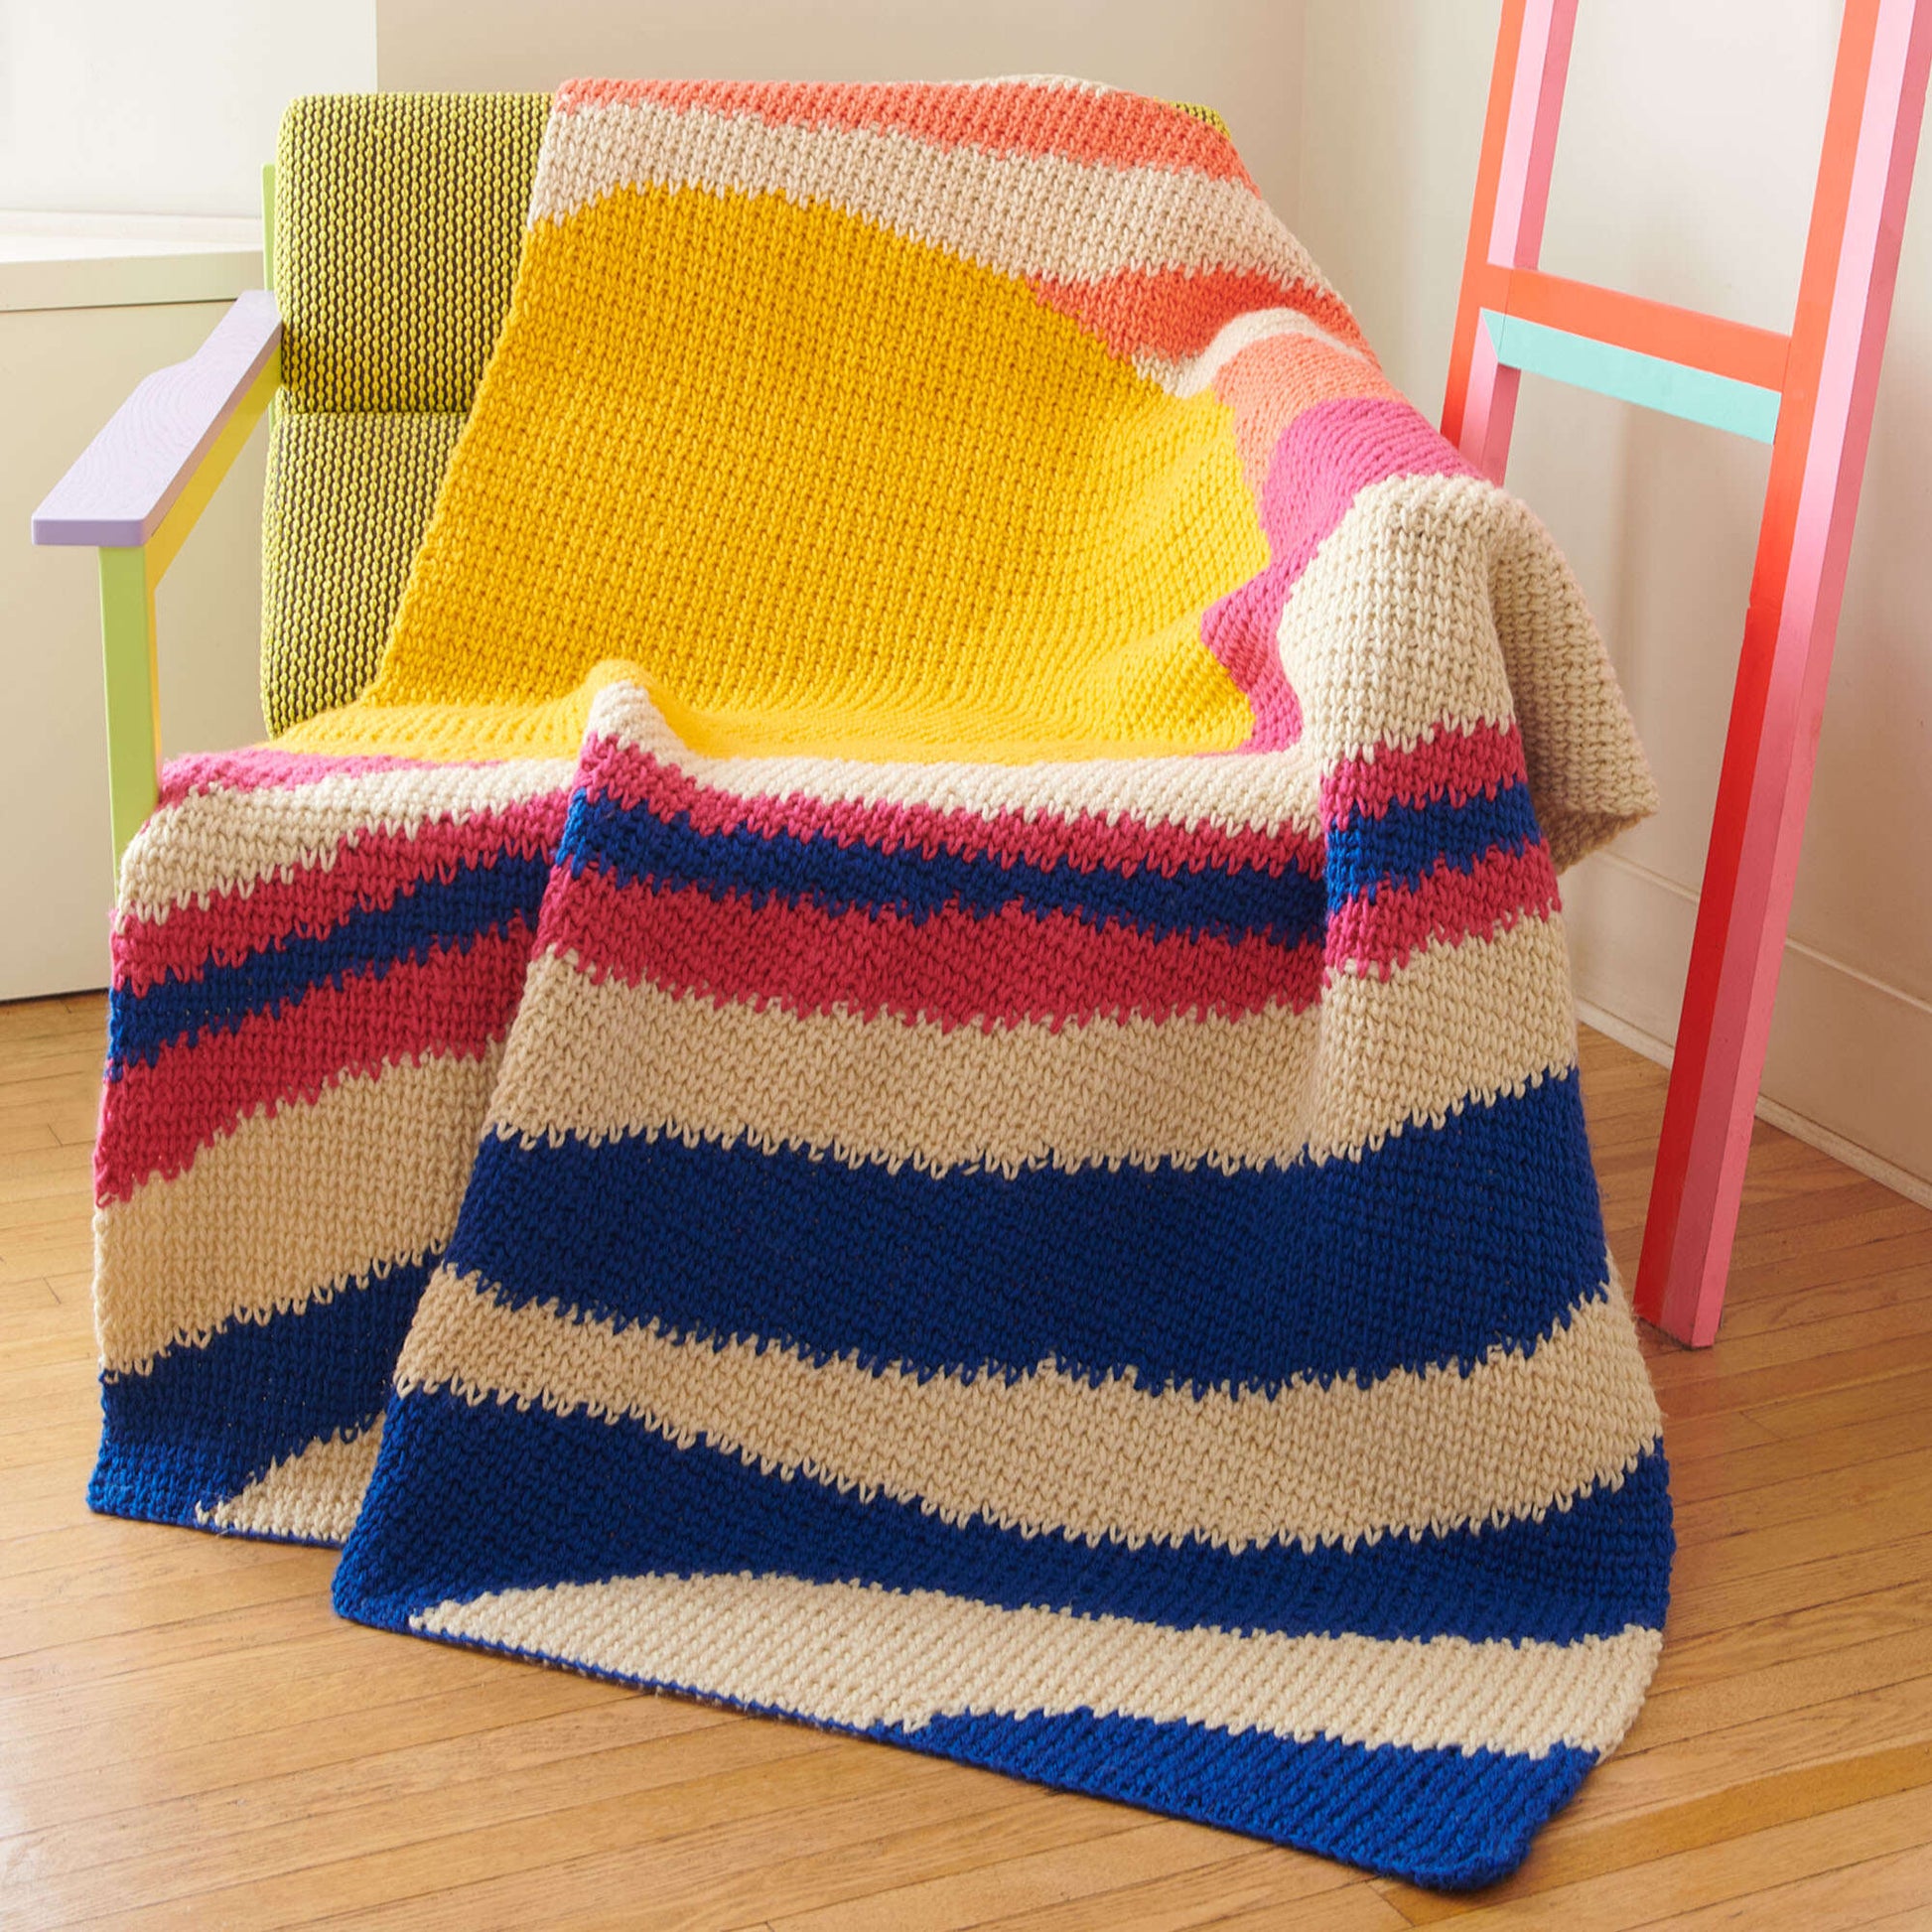 Free Caron It’S Gonna Be A Good Day Intarsia Crochet Blanket Pattern